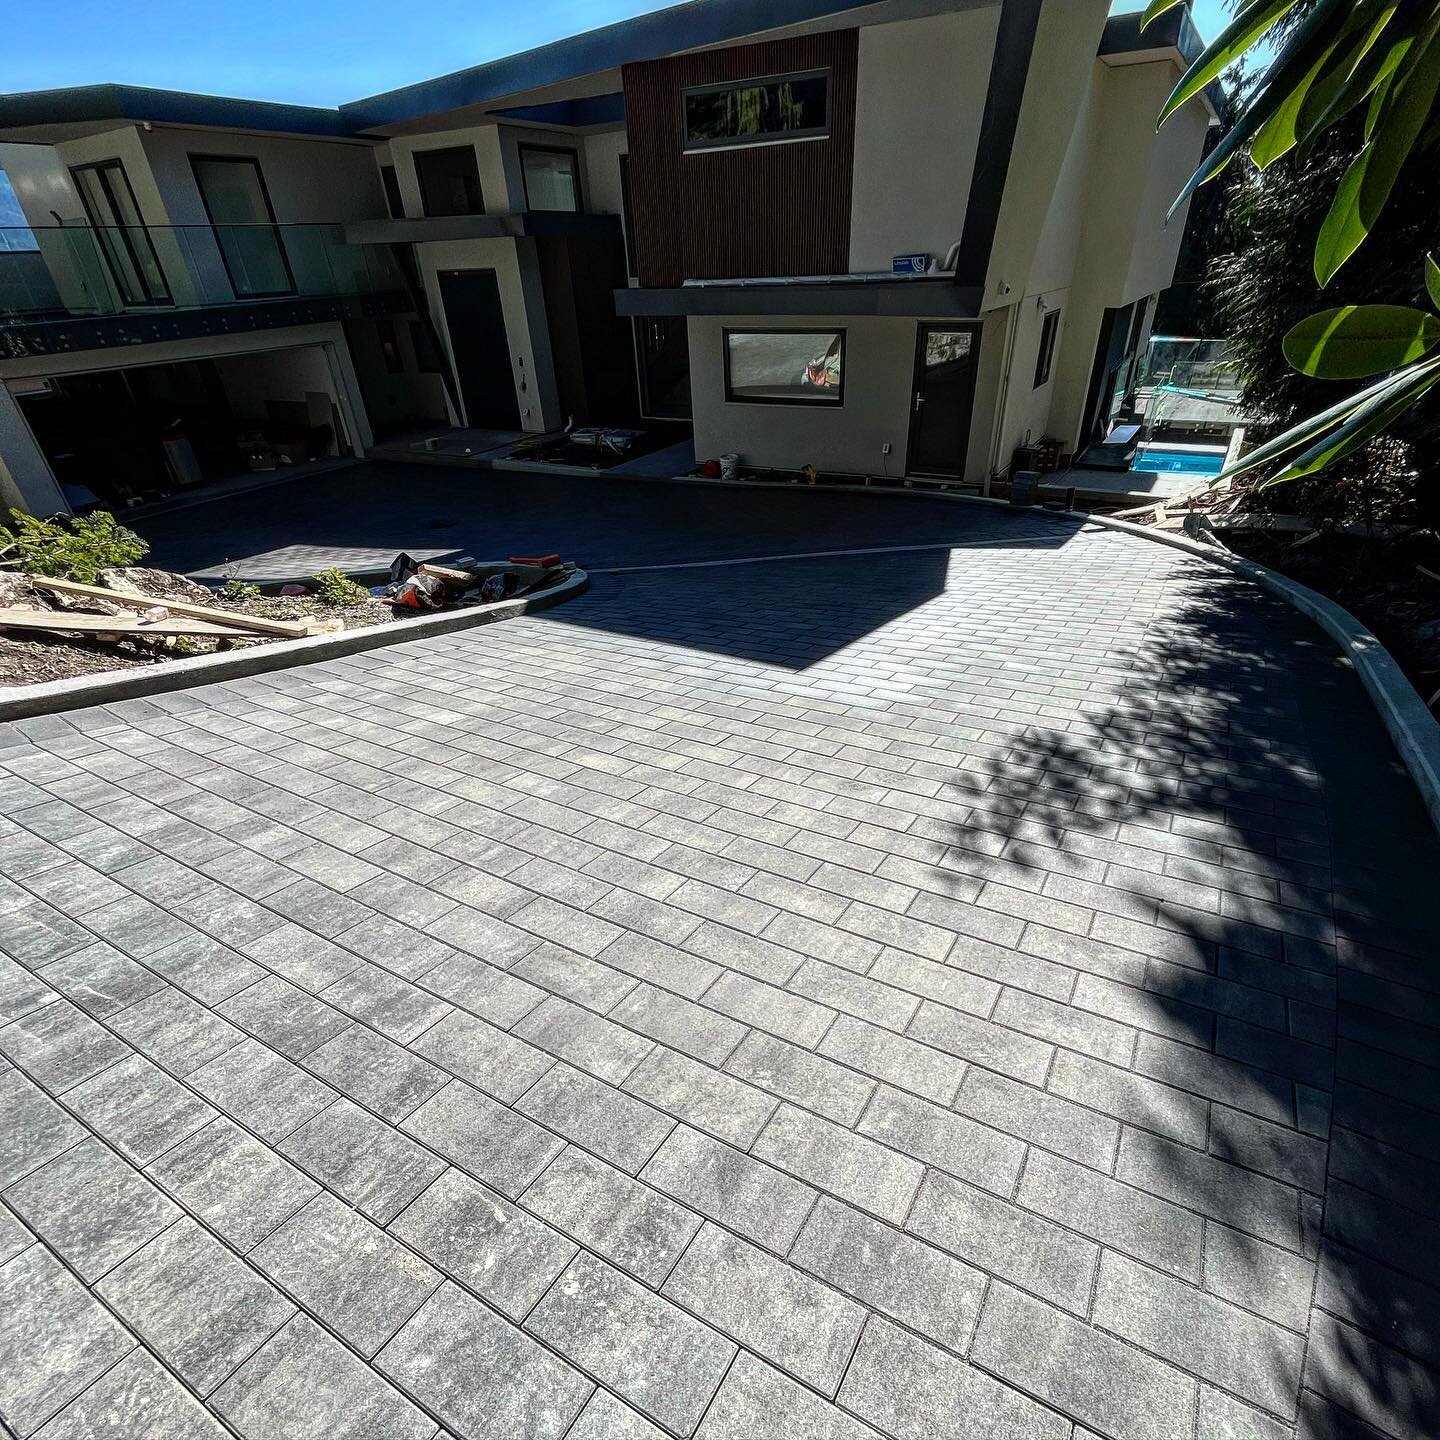 Nothing better than a wrap around driveway. Couple progress shots of our Greenwood project in the British Properties. #mountainscape #pavingstones #newstone @newstonegroup #retainingwall #concrete #driveway #hardscape #howtohardscape #vancouver #pnw 